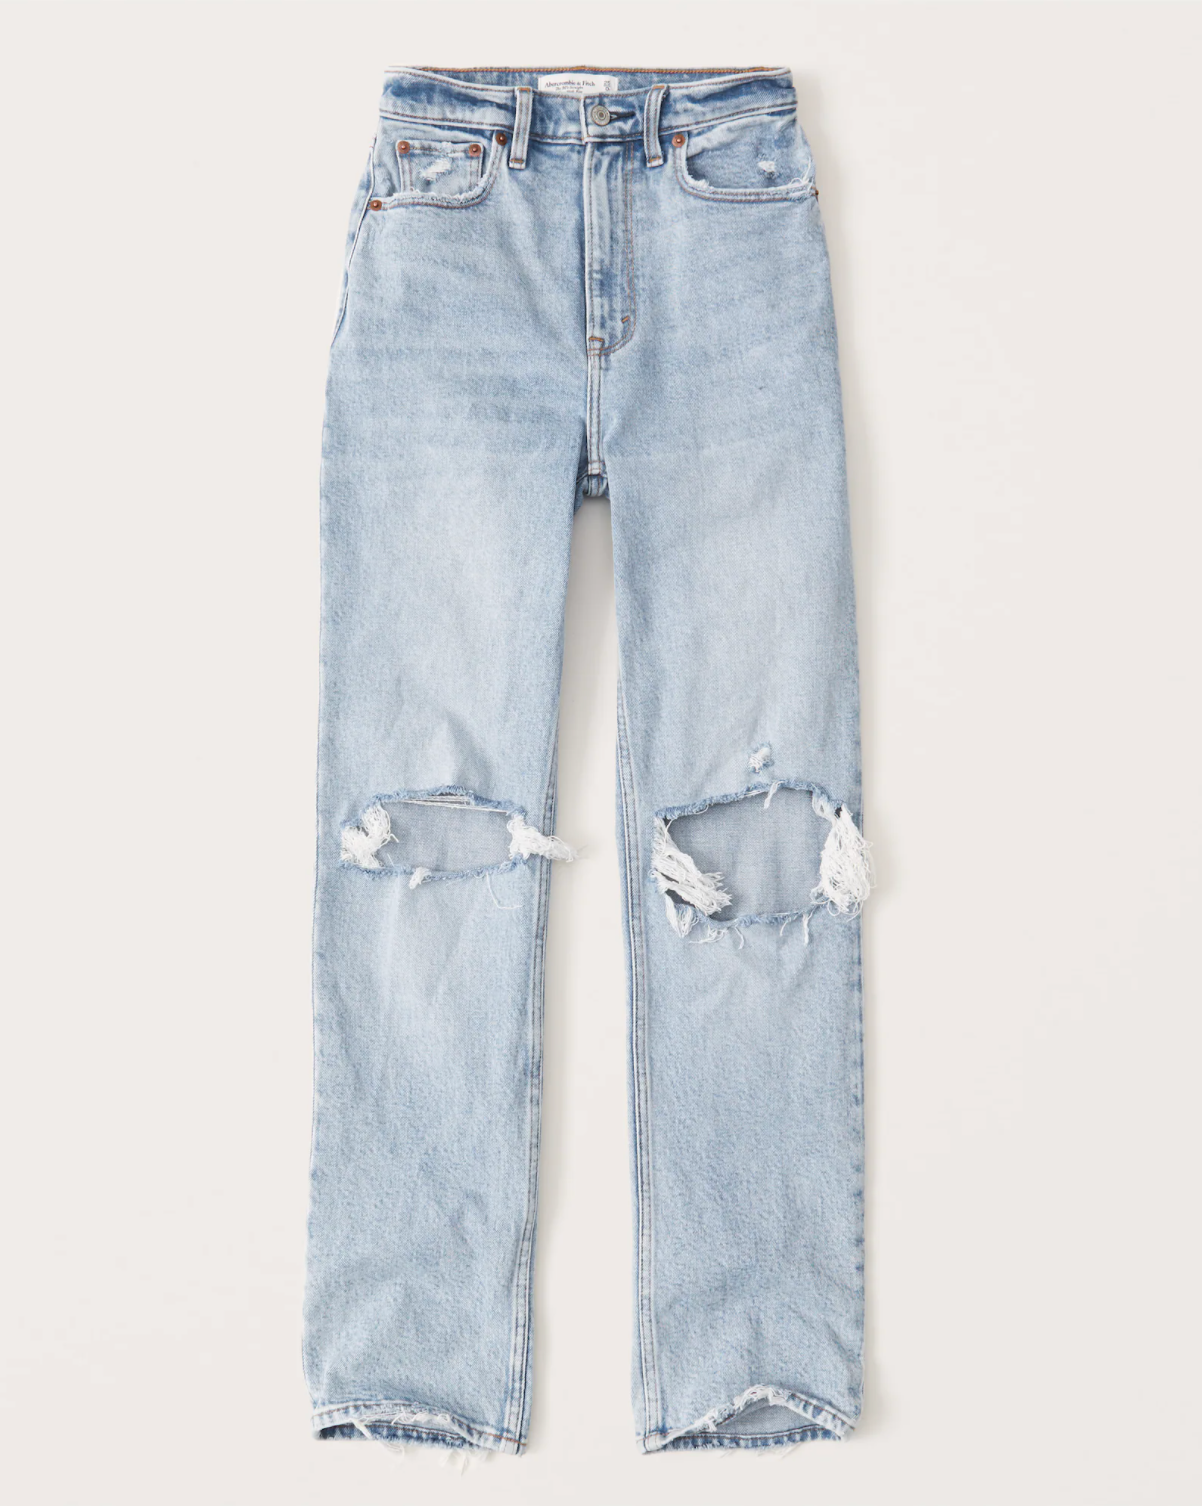 TikTok Is Obsessed With These $89 Abercrombie Jeans | Entertainment Tonight